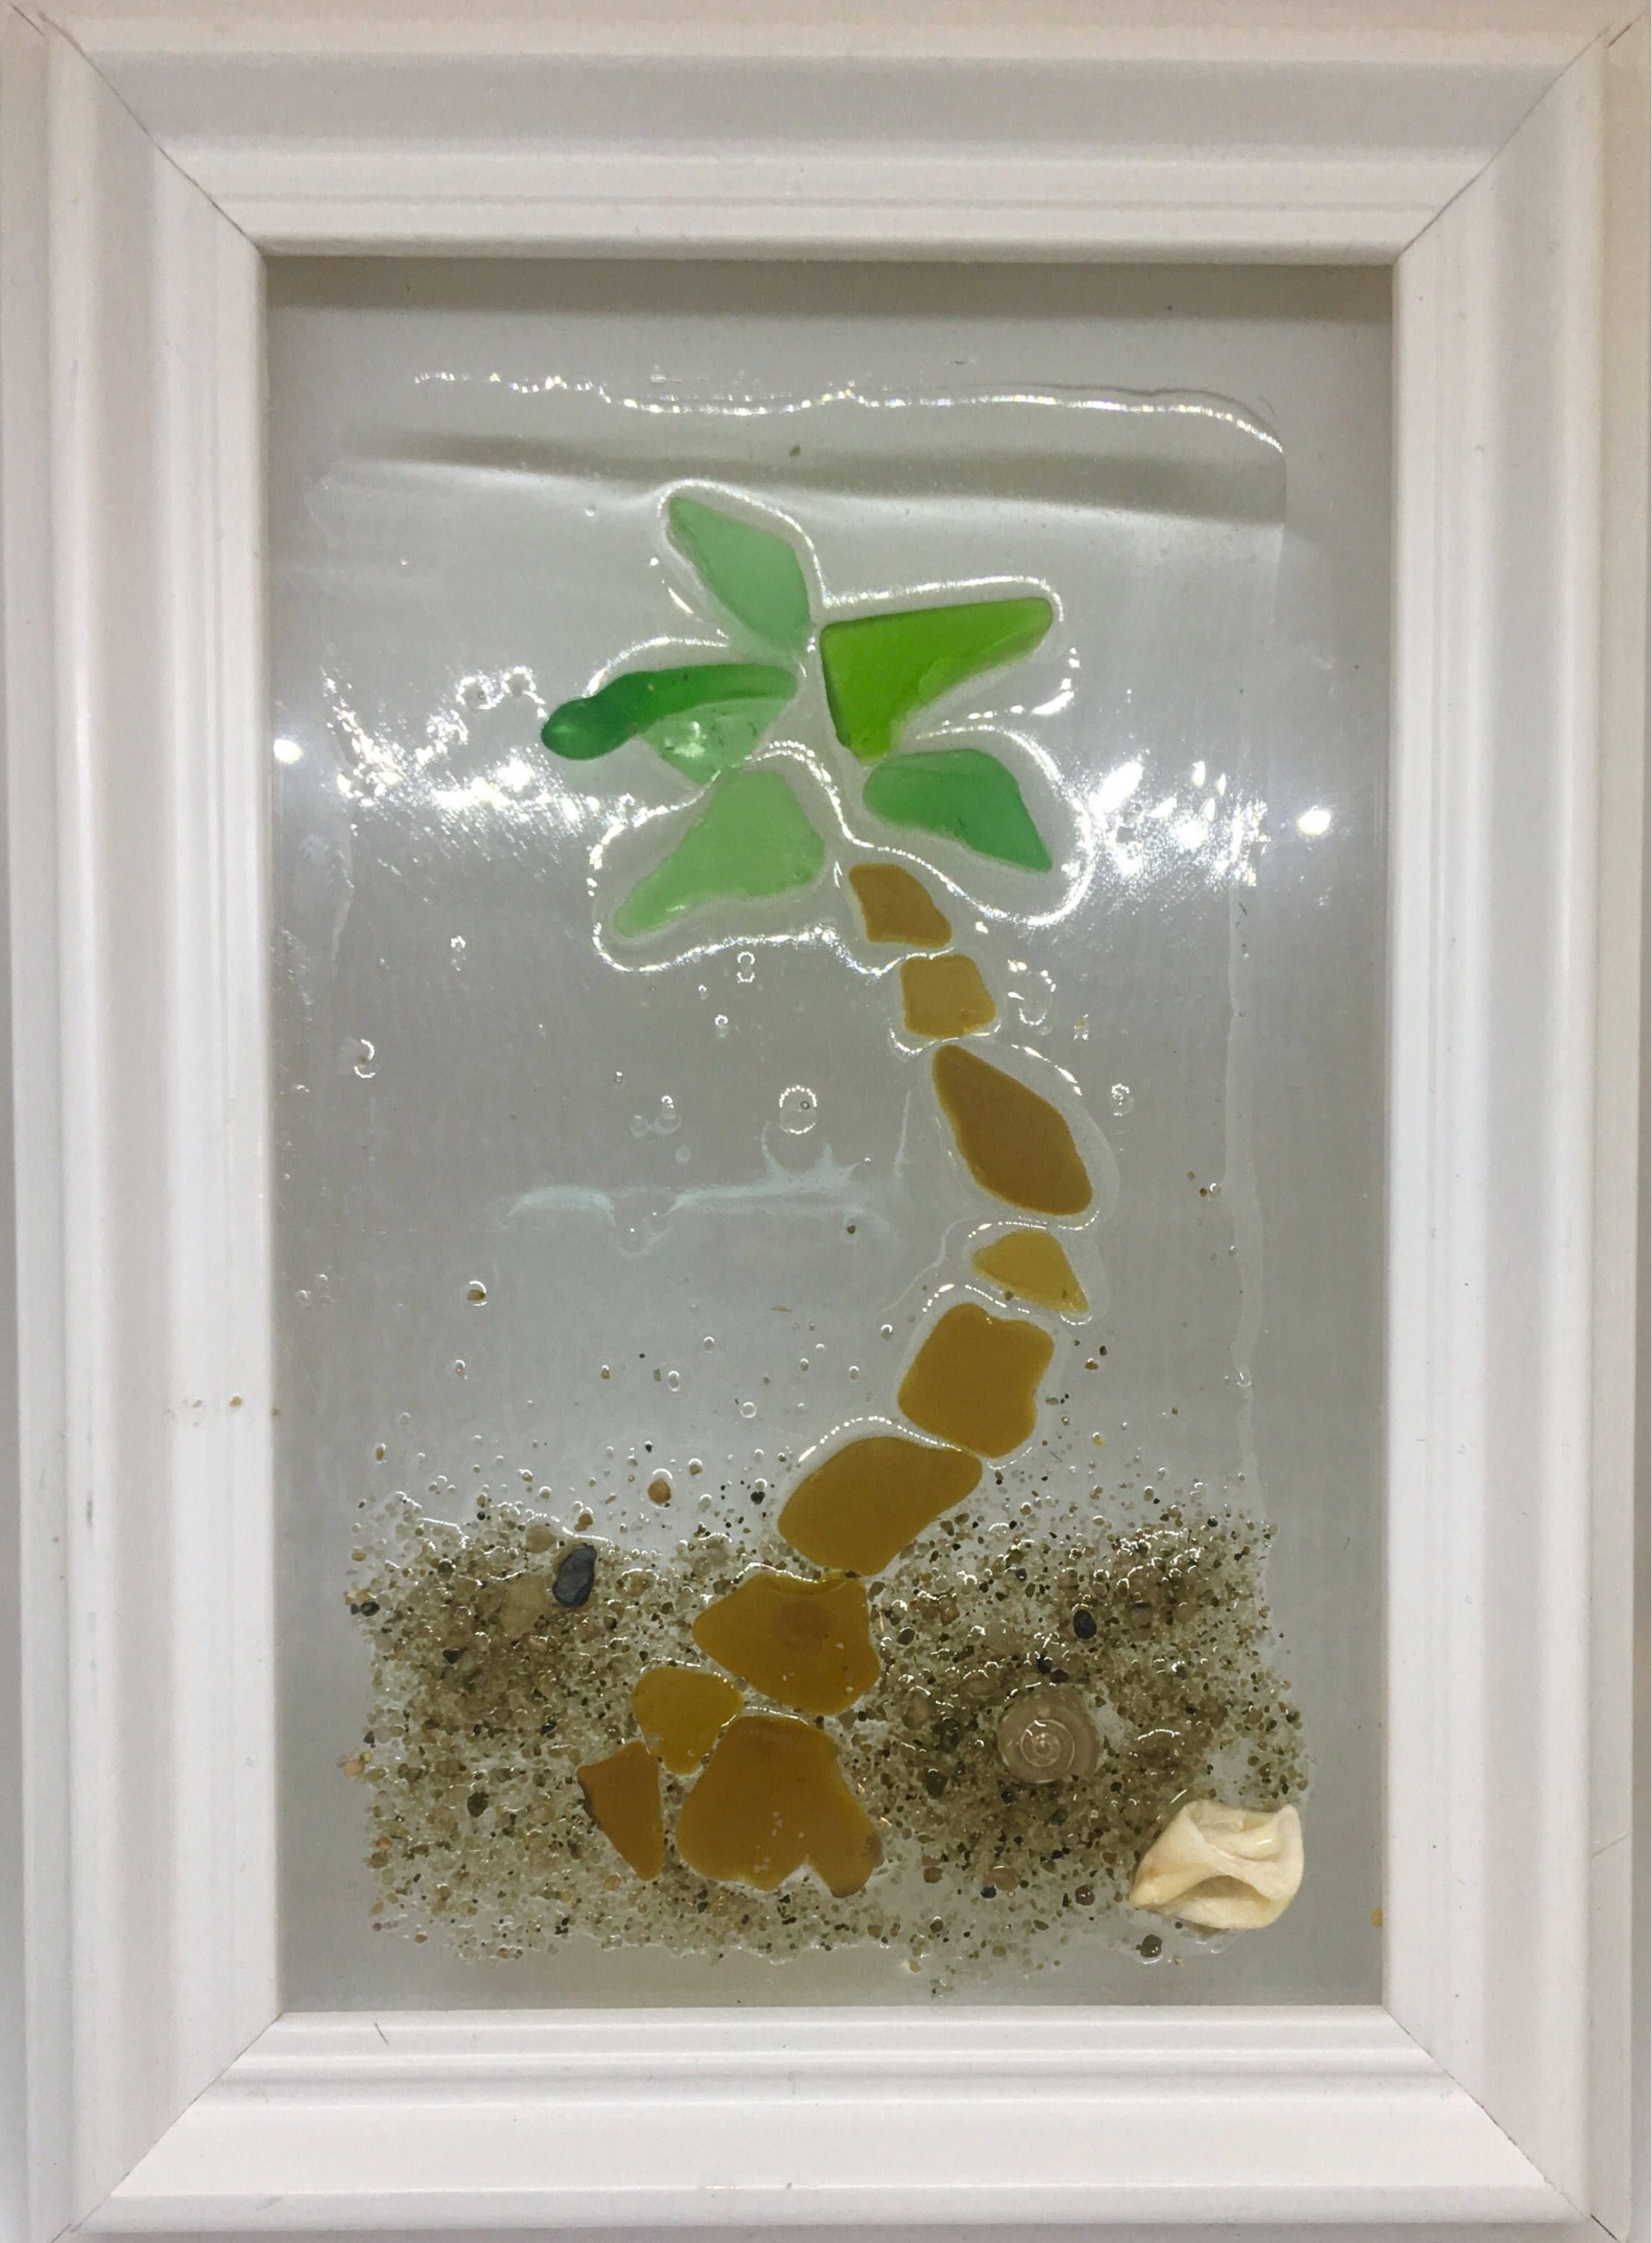 Sea Glass Wall Art: Palm Tree Design Made From Genuine Sea Glass 4x6 Intended For Most Recent Palm Tree Wall Art (Gallery 20 of 20)